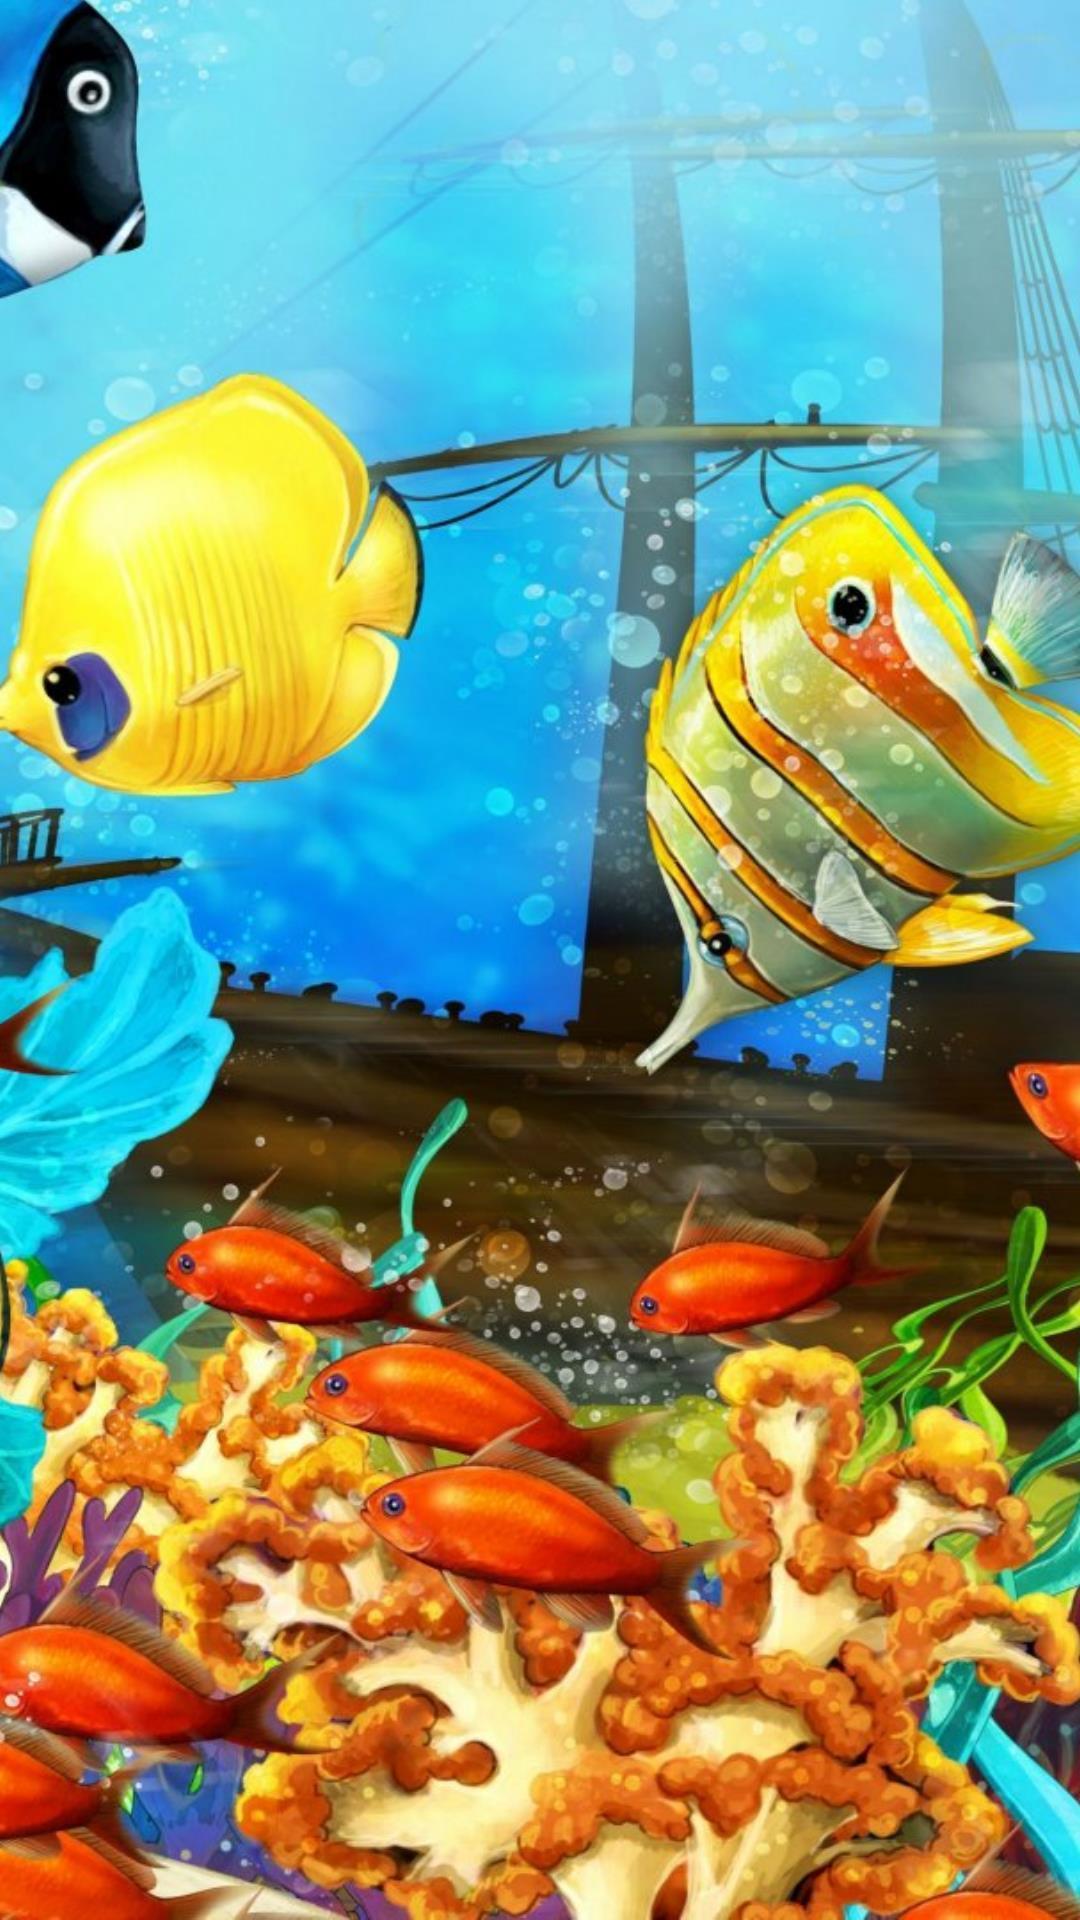 Tropical Fish Live Wallpaper For Android Apk